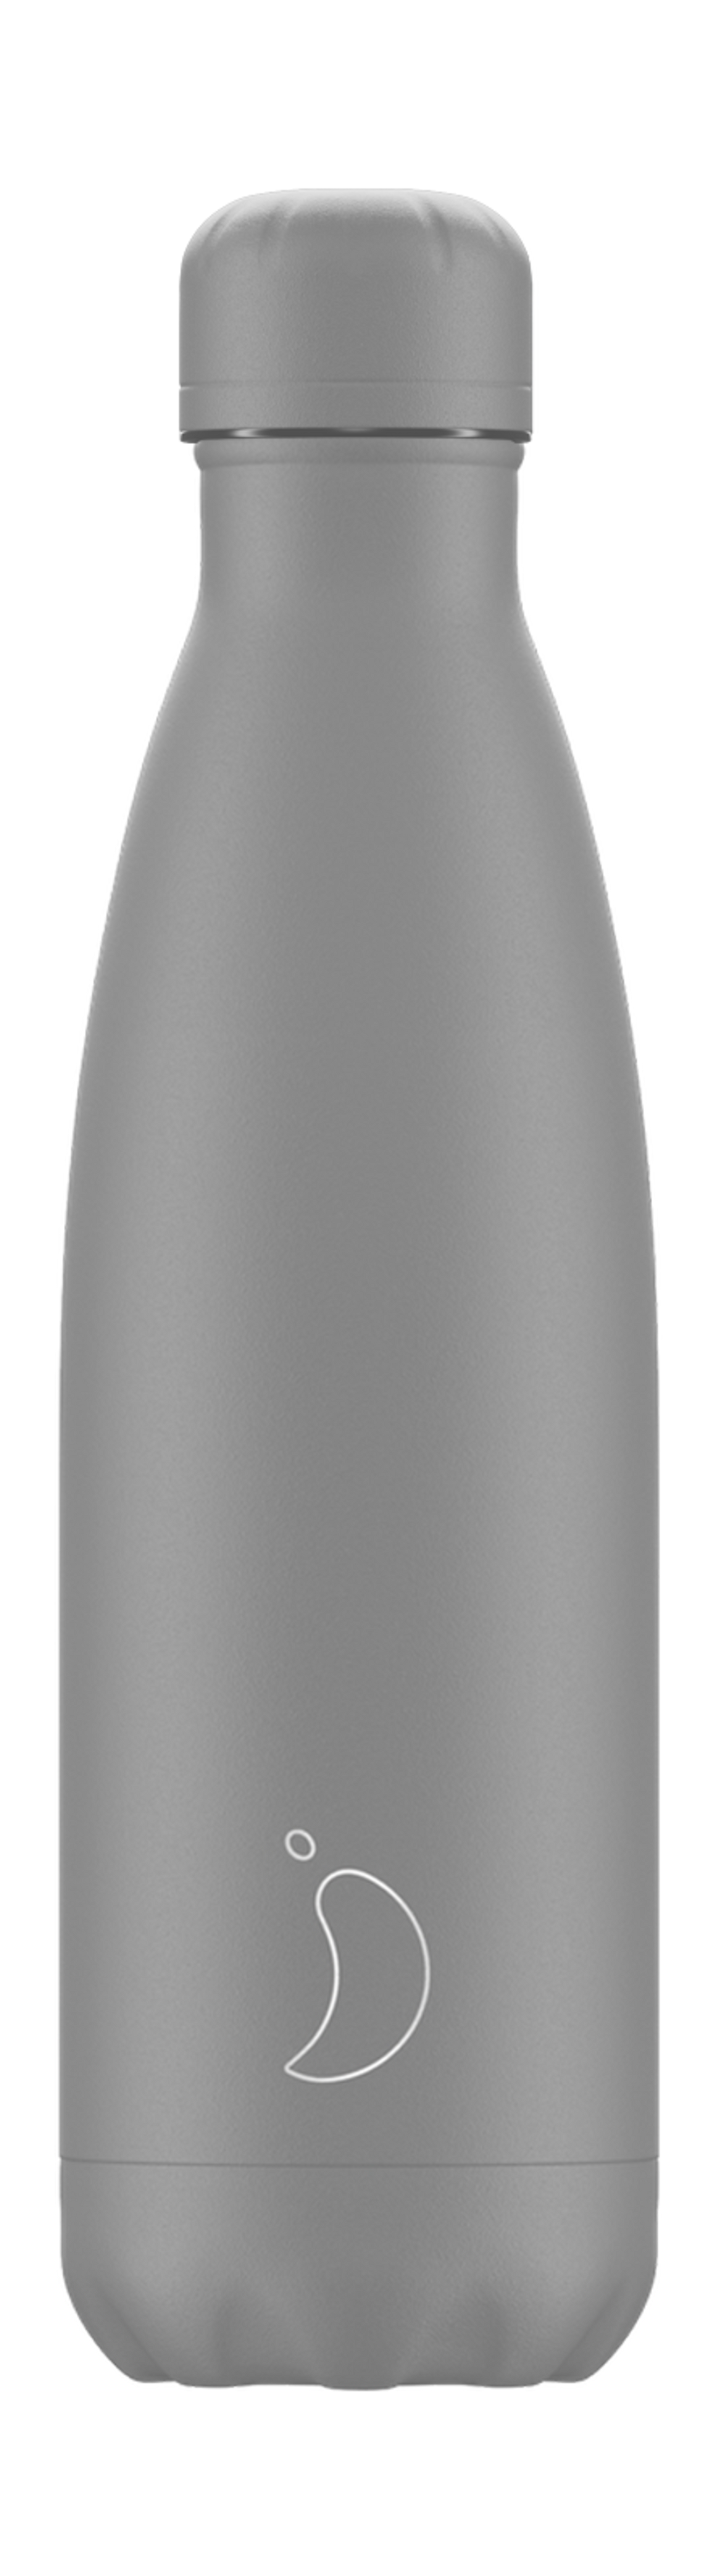 All Grey Monochrome Chilly's Bottle 500 ml